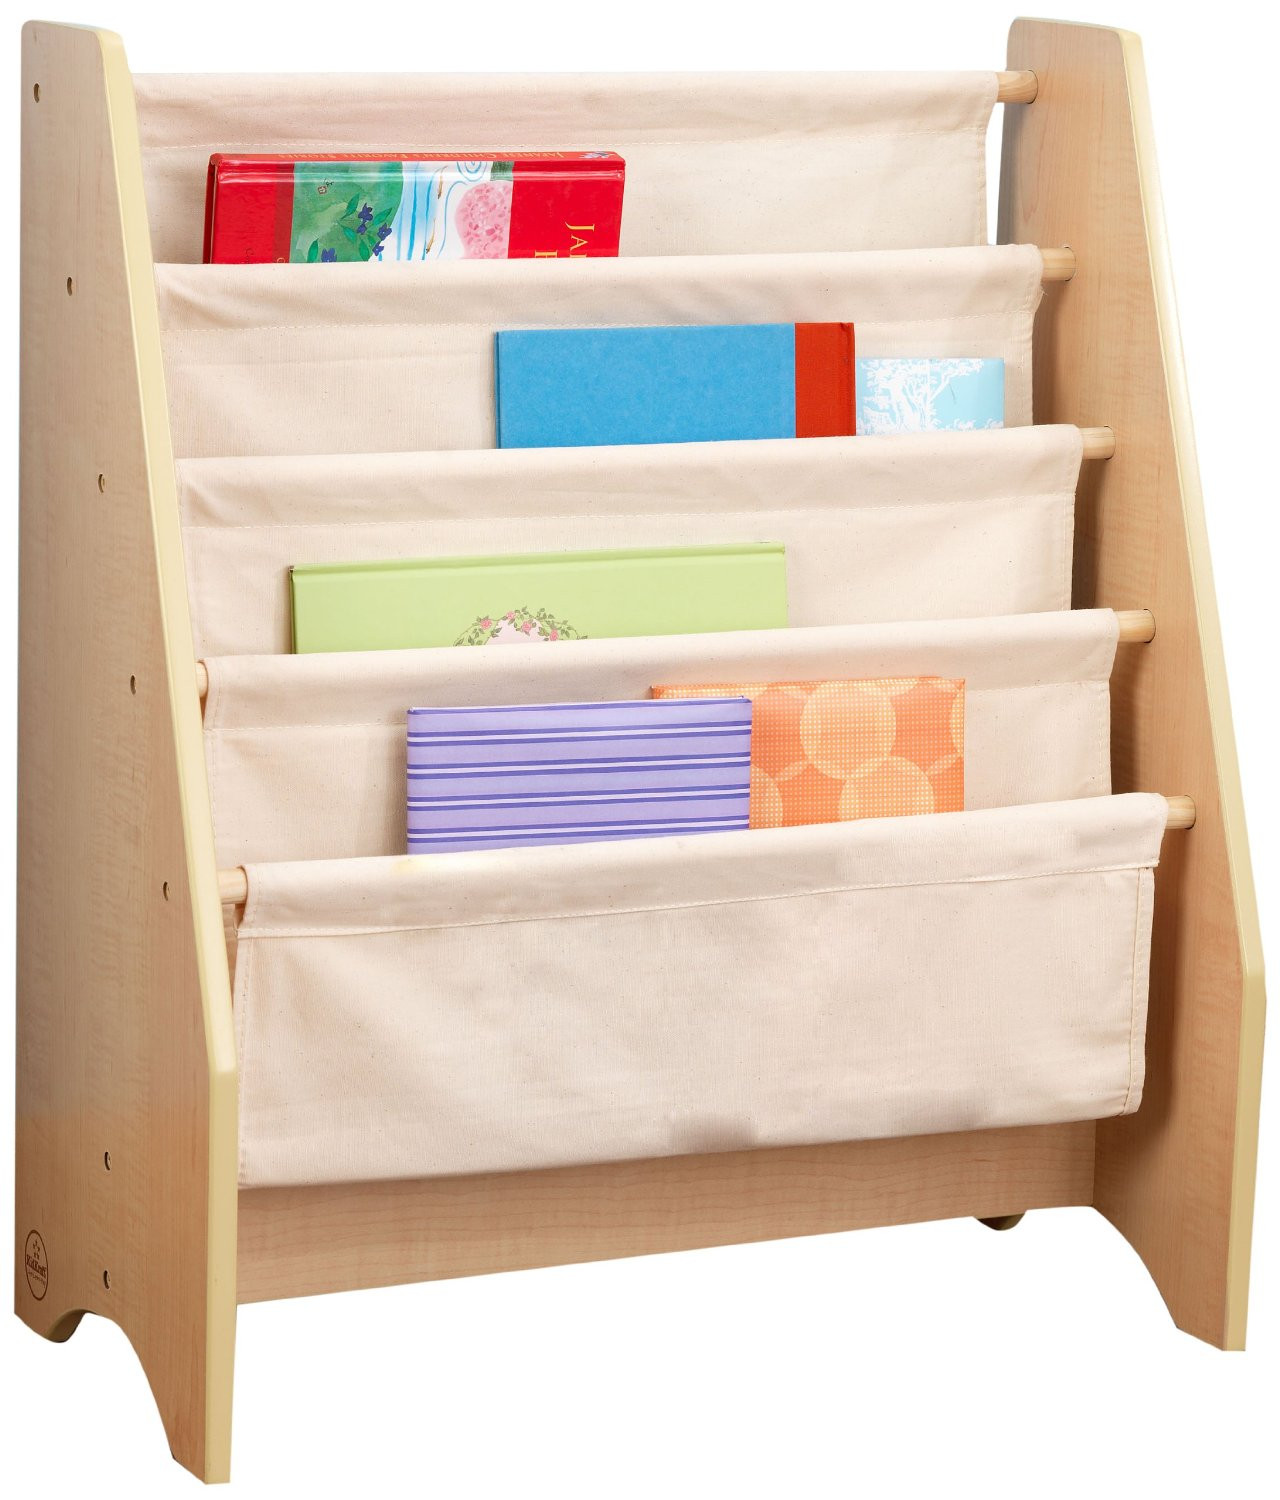 Bookcases For Kids Room
 Top 12 Kids Bookcase and Bookshelves Review